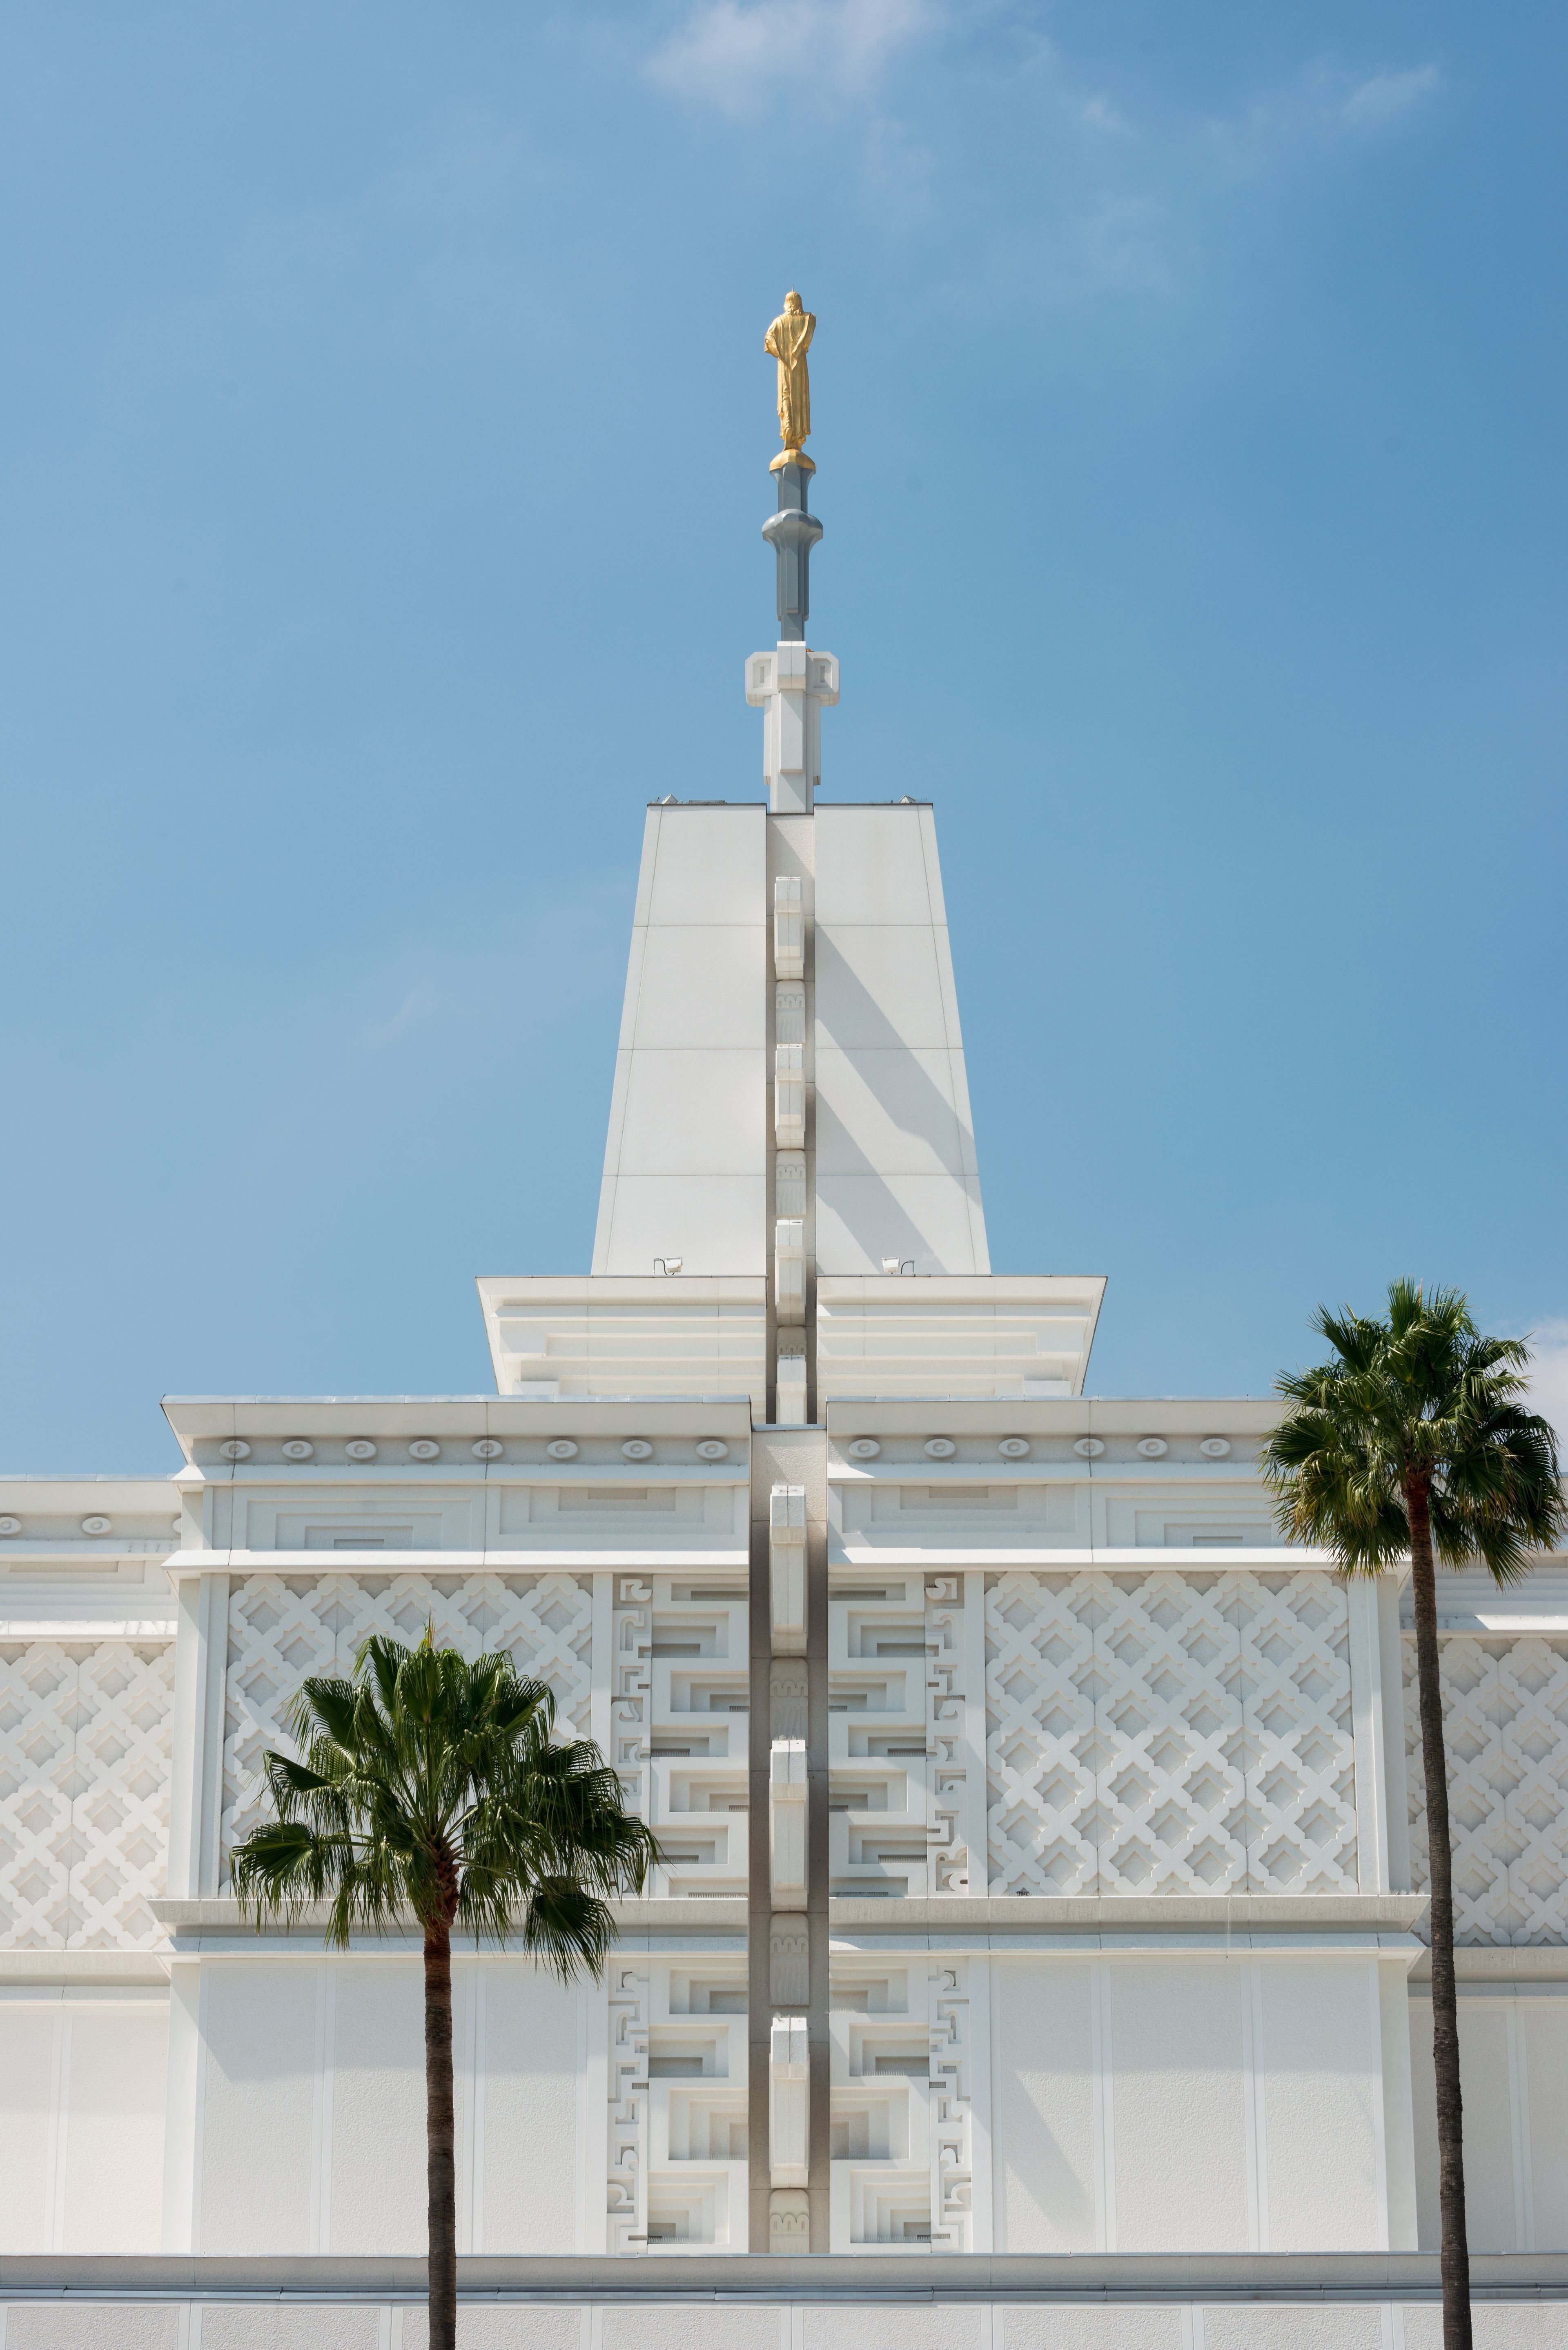 The front of the square spire on top of the Mexico City Mexico Temple.